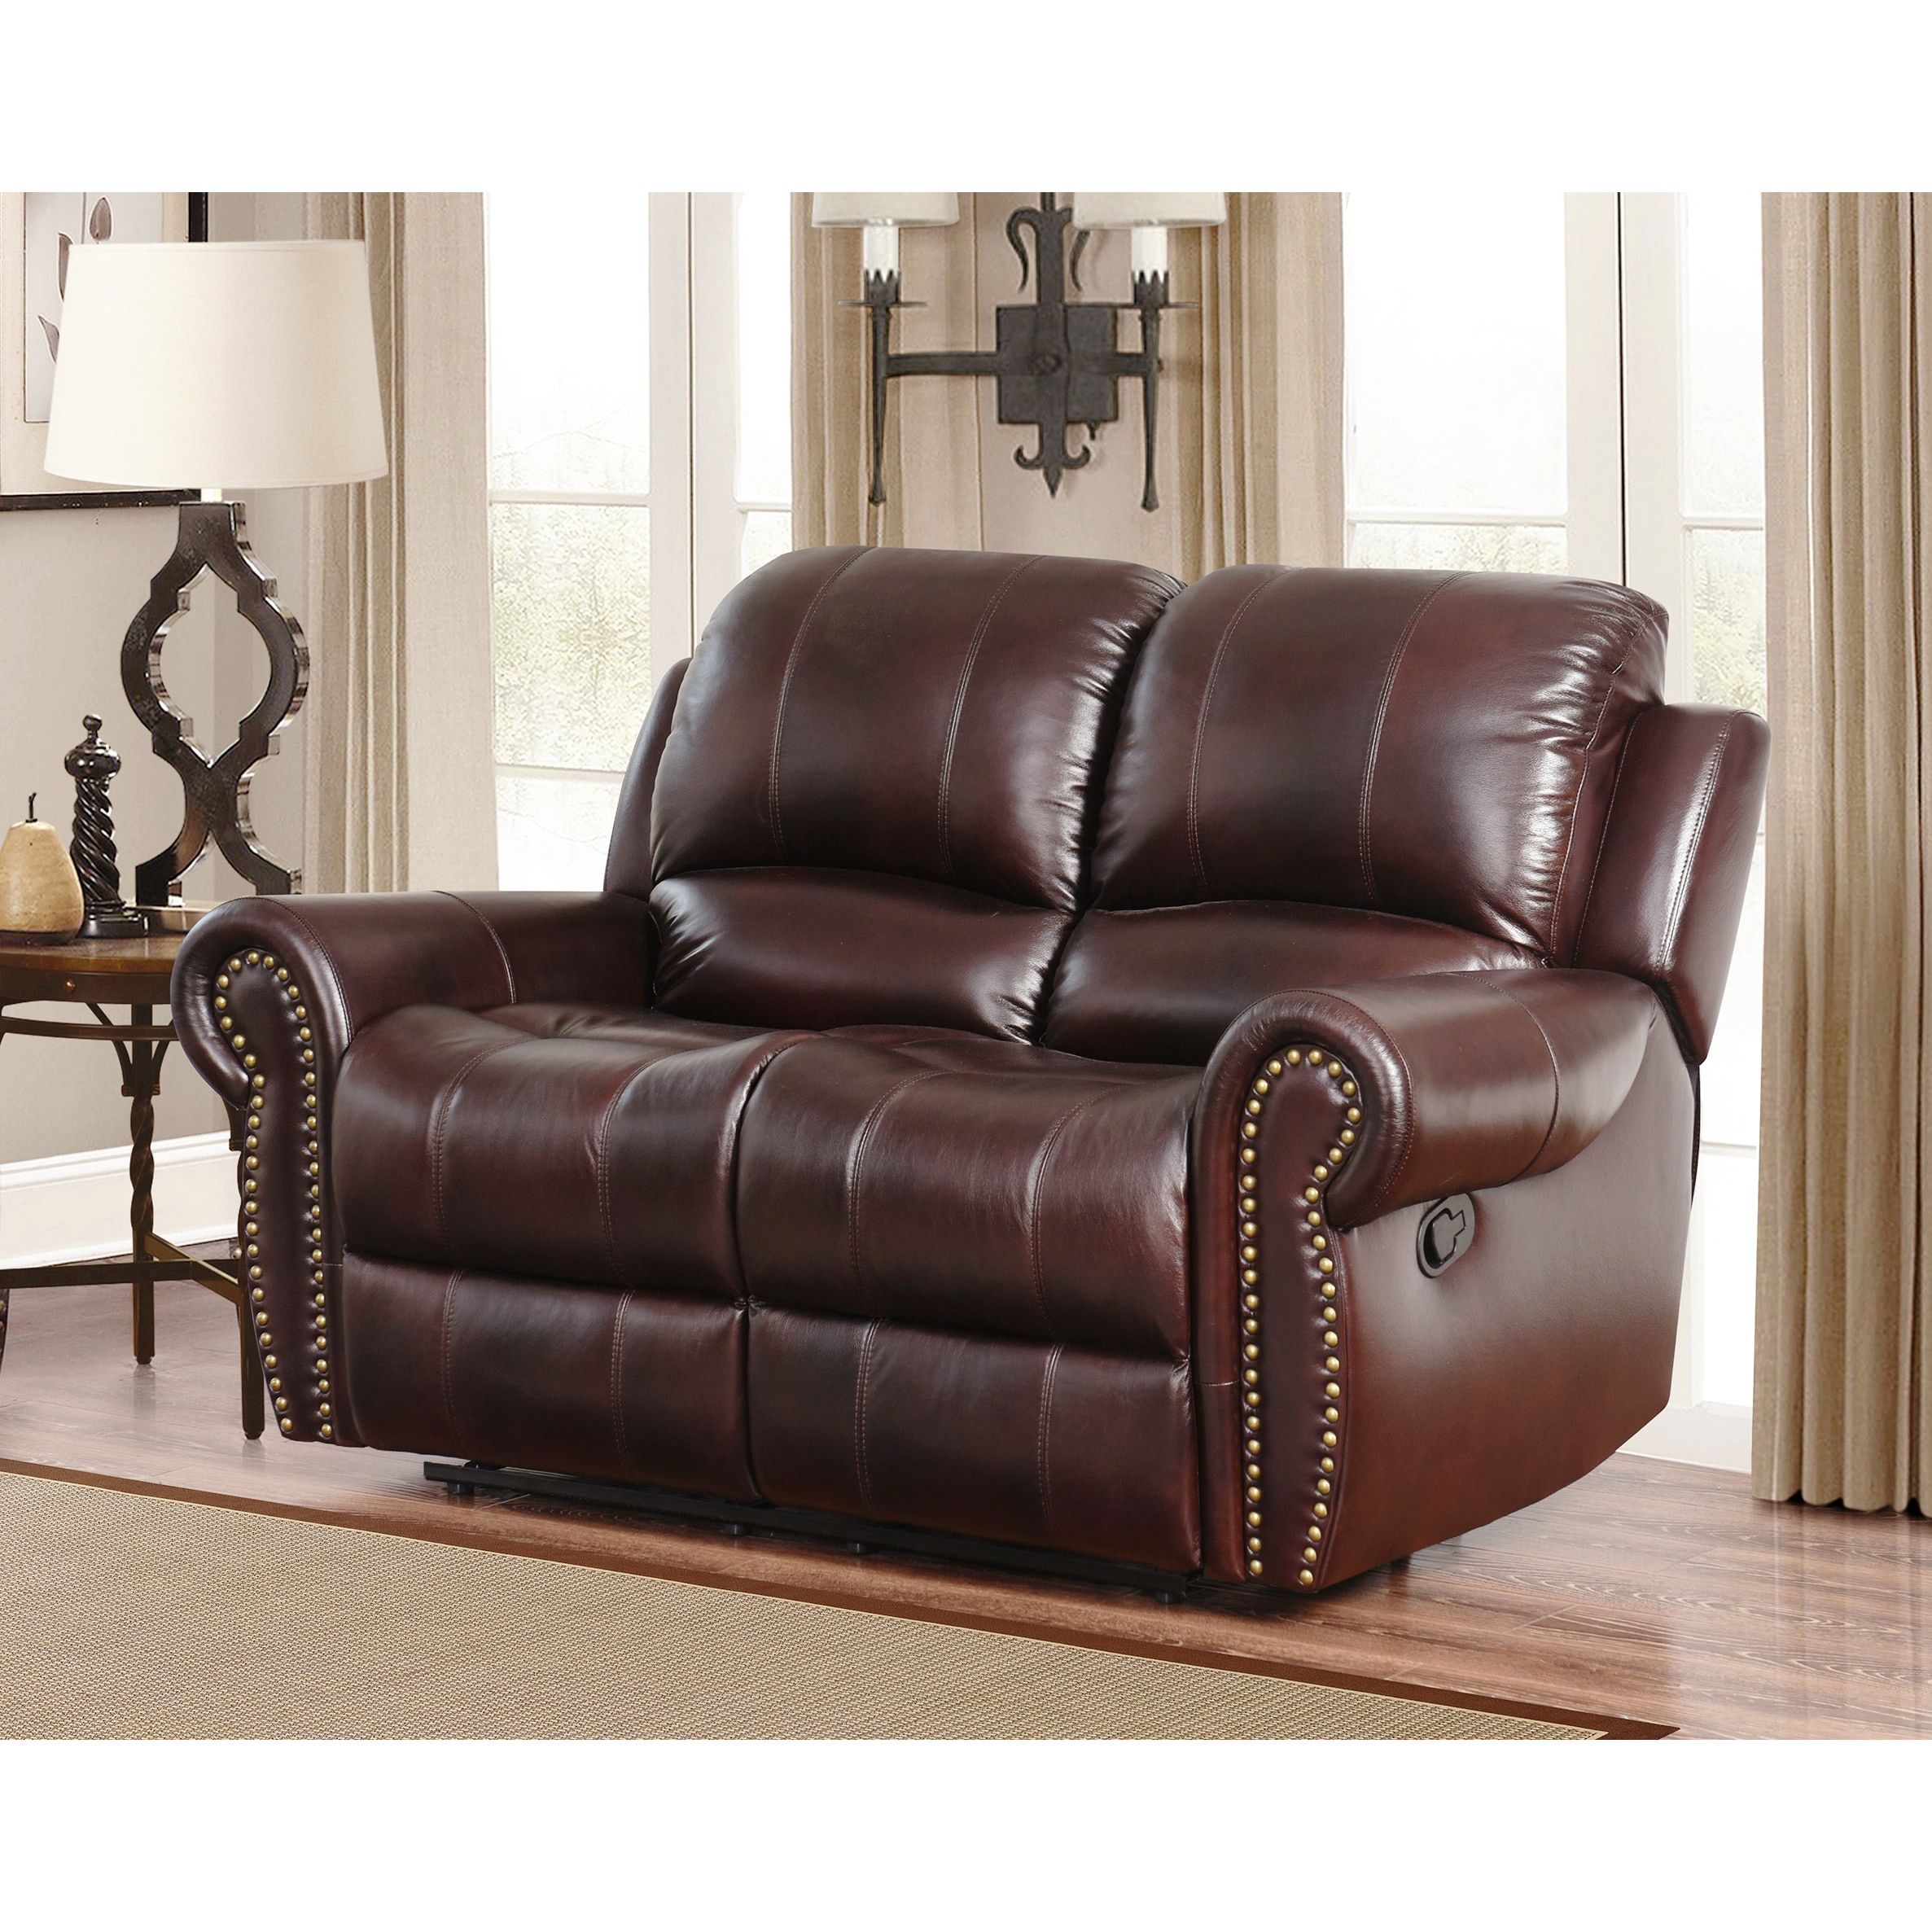 Abbyson Broadway Top Grain Leather Reclining Loveseat Brown With In Top Grain Leather Loveseats (Gallery 1 of 20)